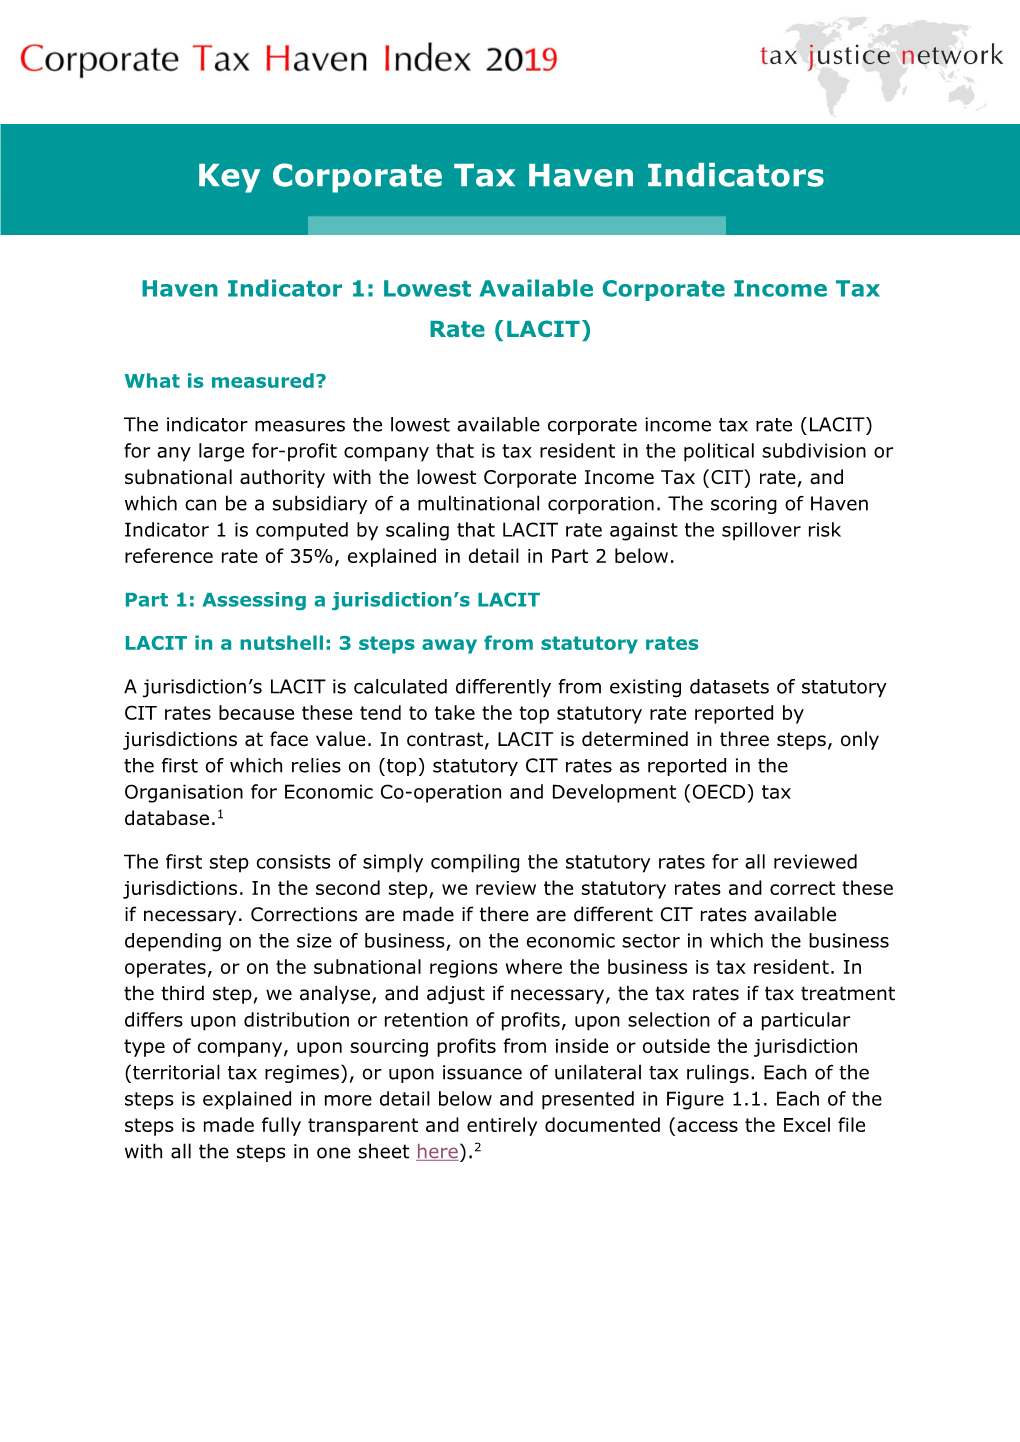 Lowest Available Corporate Income Tax Rate (LACIT)